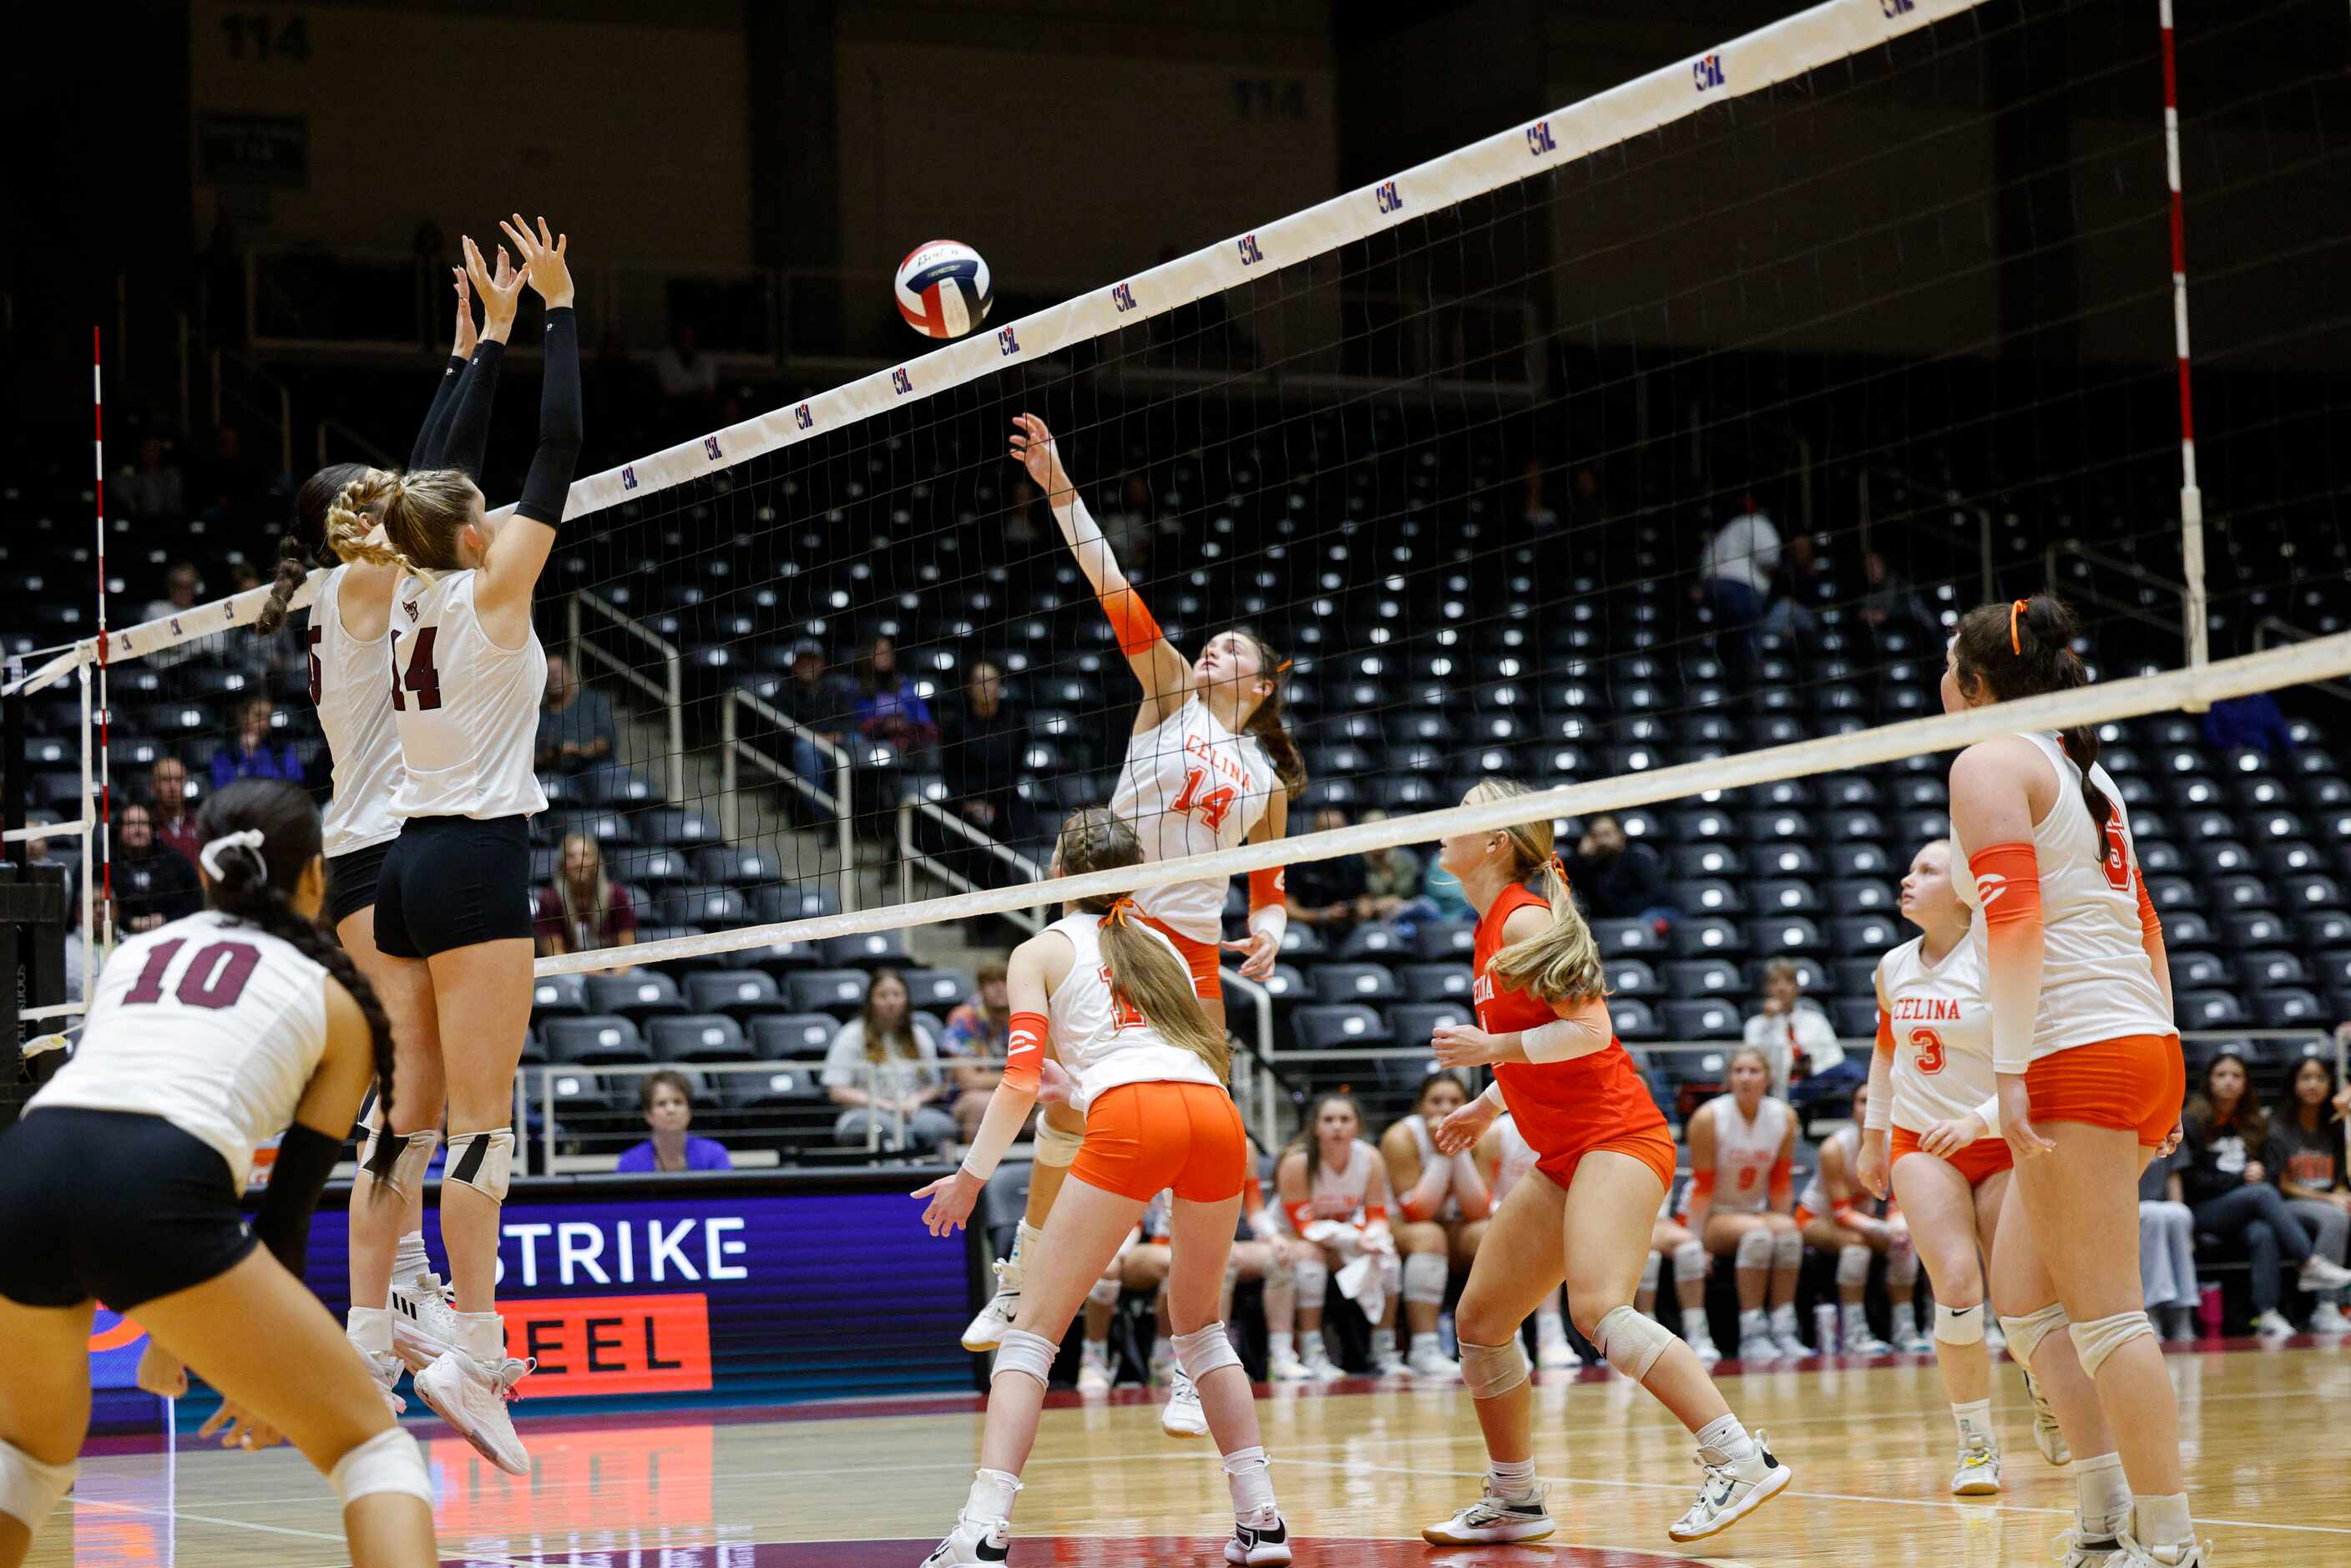 Celina's Kennedy Hangartner (14) spikes the ball during a UIL class 4A volleyball state...